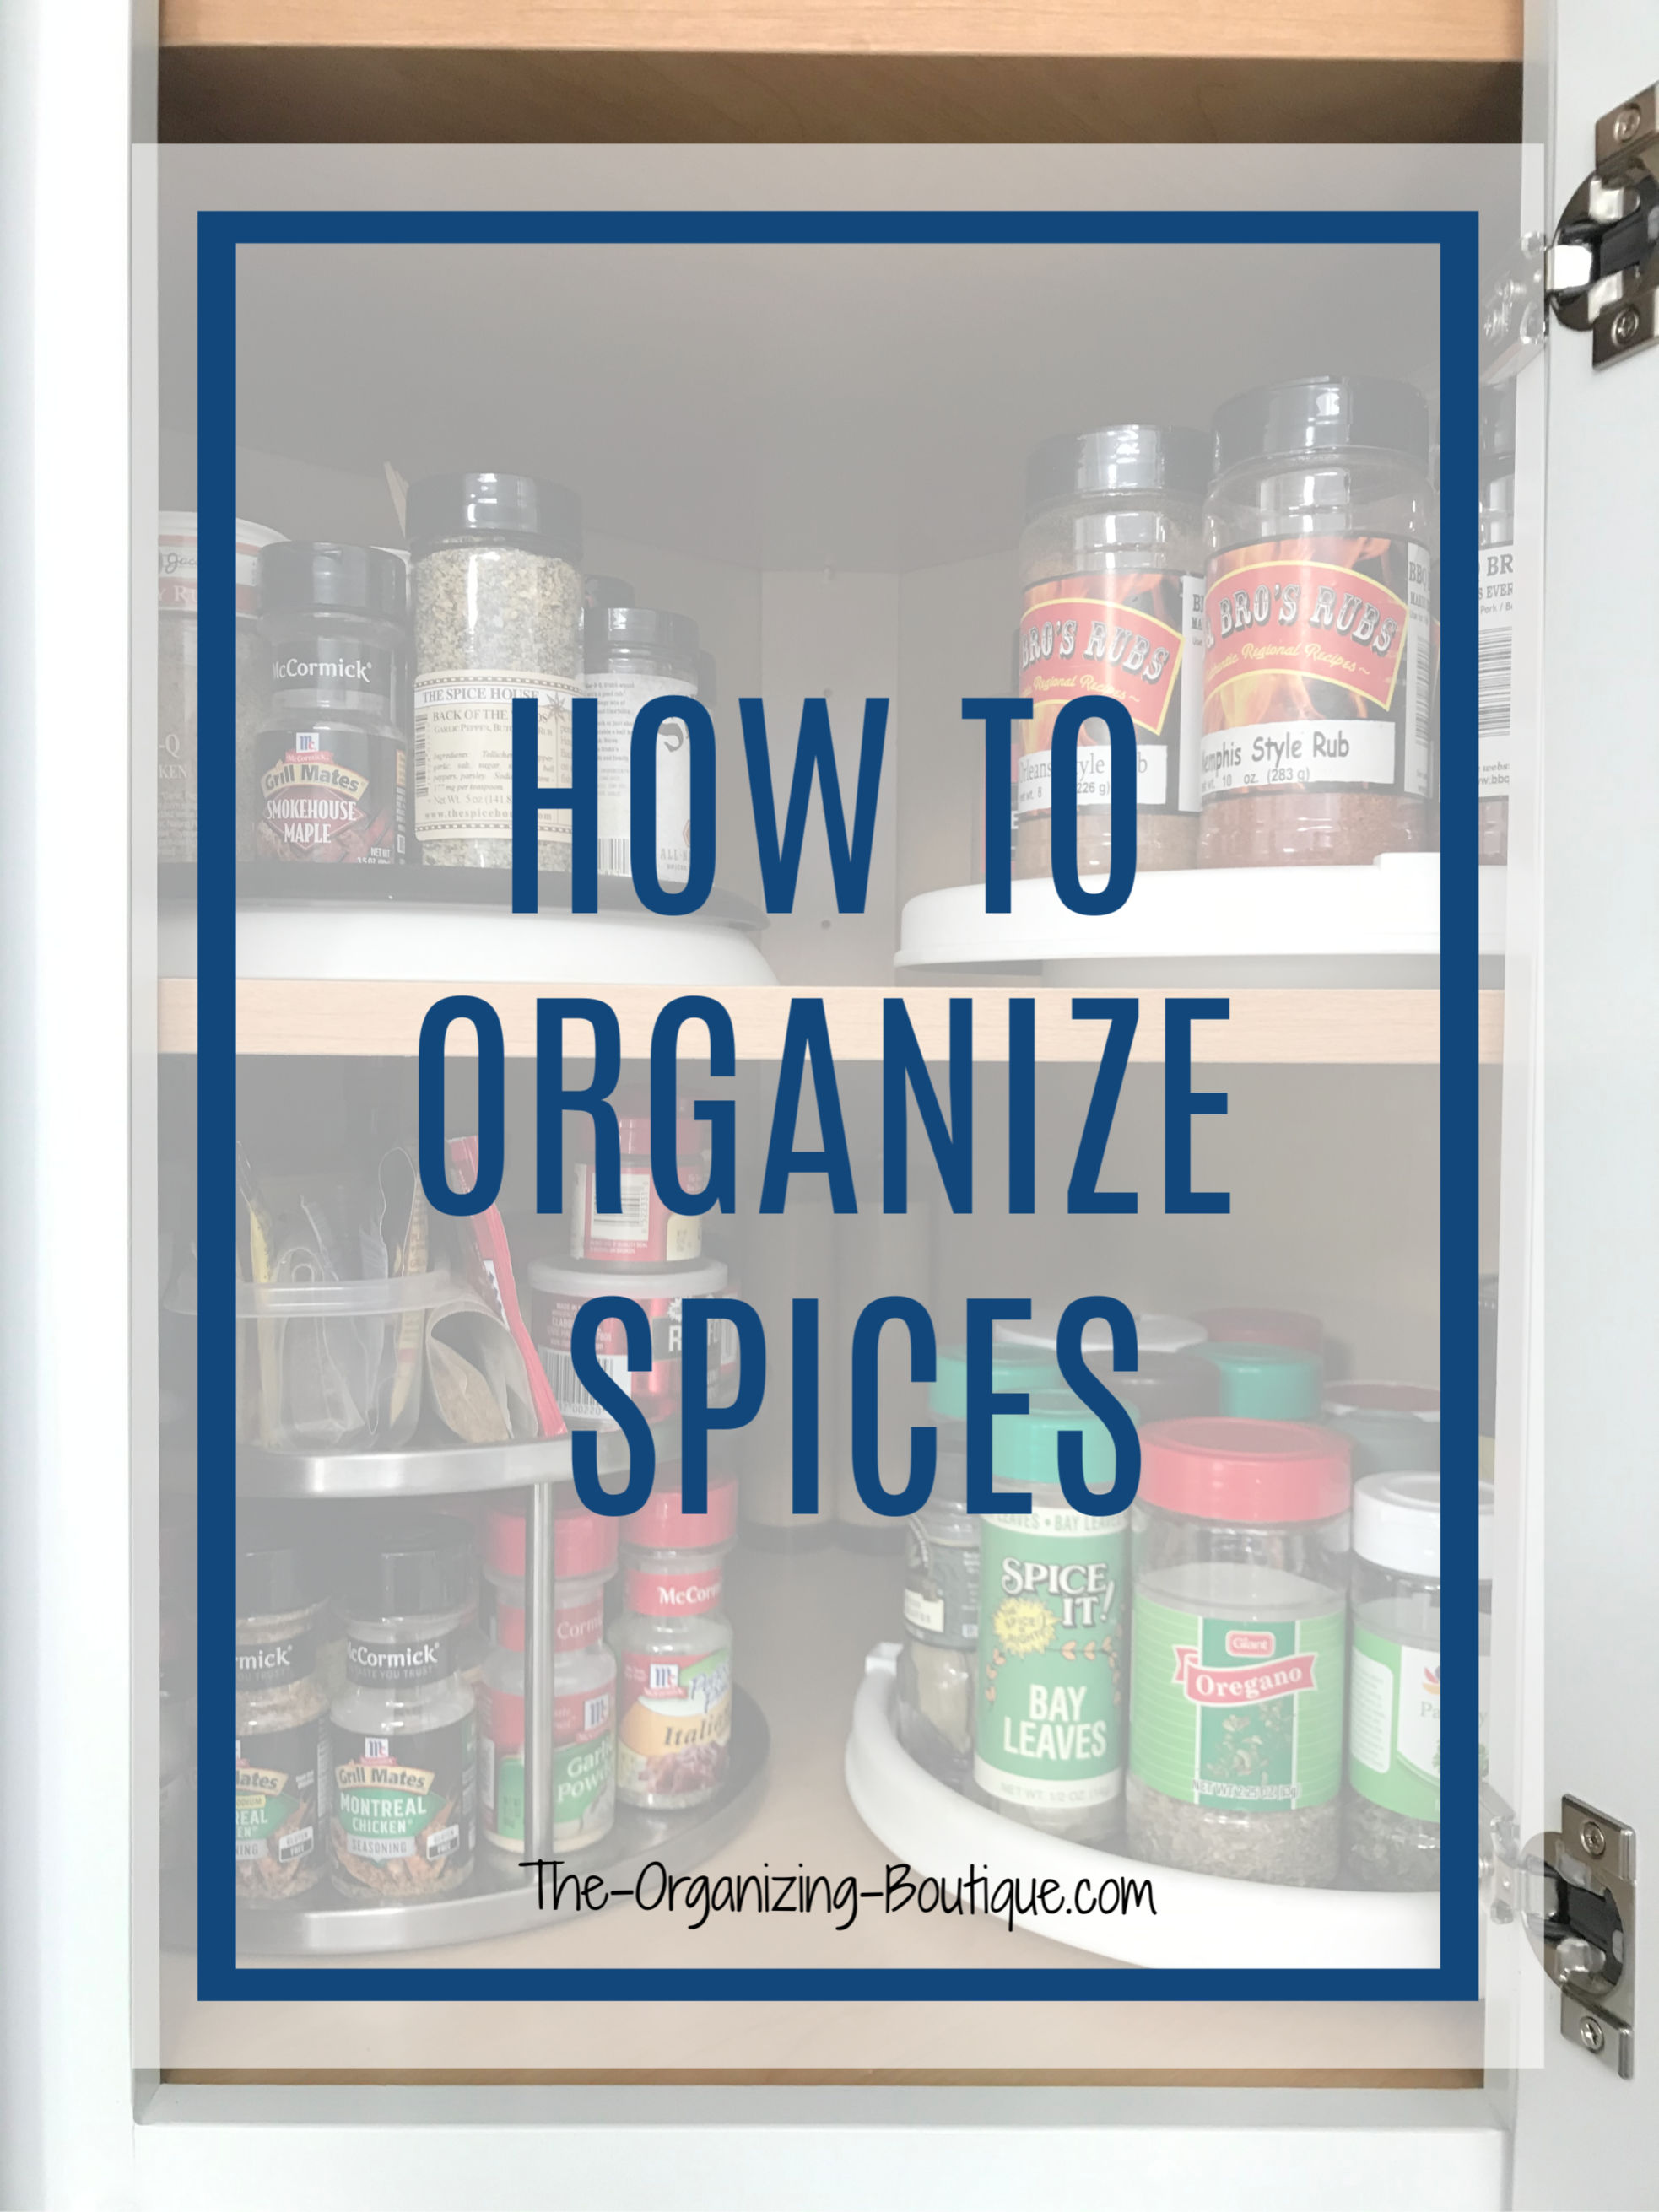 Looking for a spice organizer? Spice labels? Magnetic spice racks? Here's how to organize your spices AND some great product suggestions!